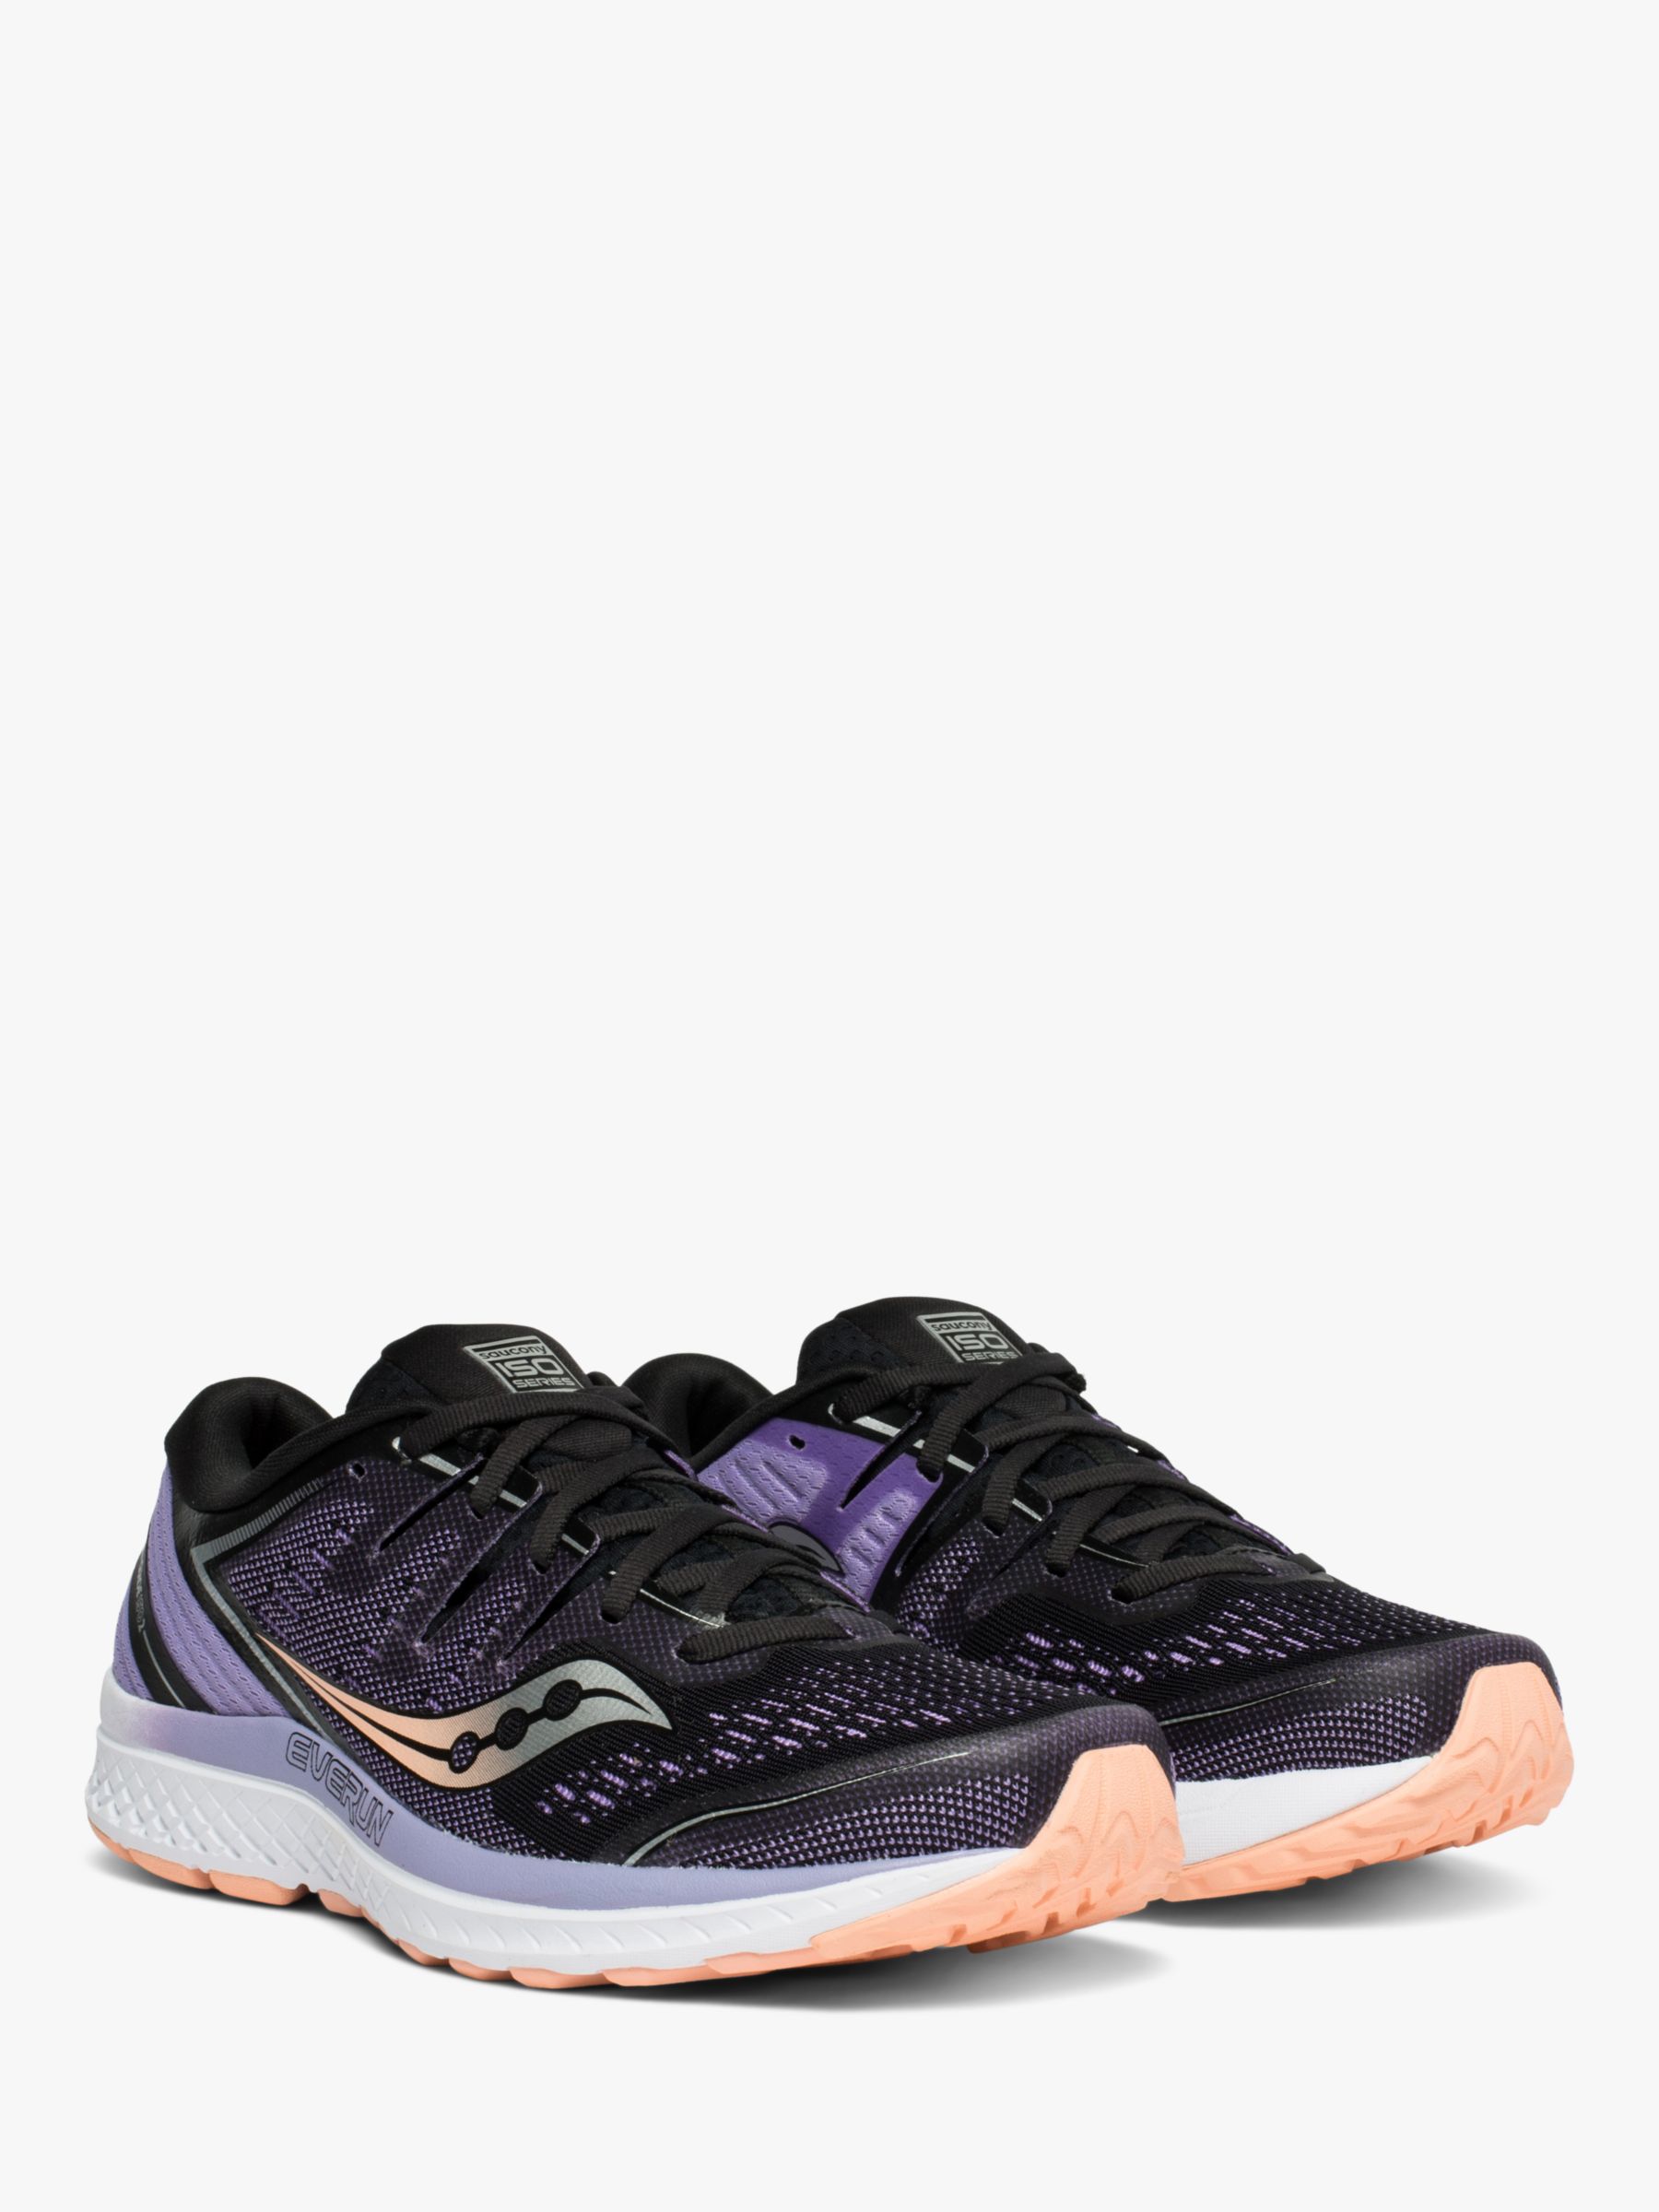 saucony guide iso 2 womens uk